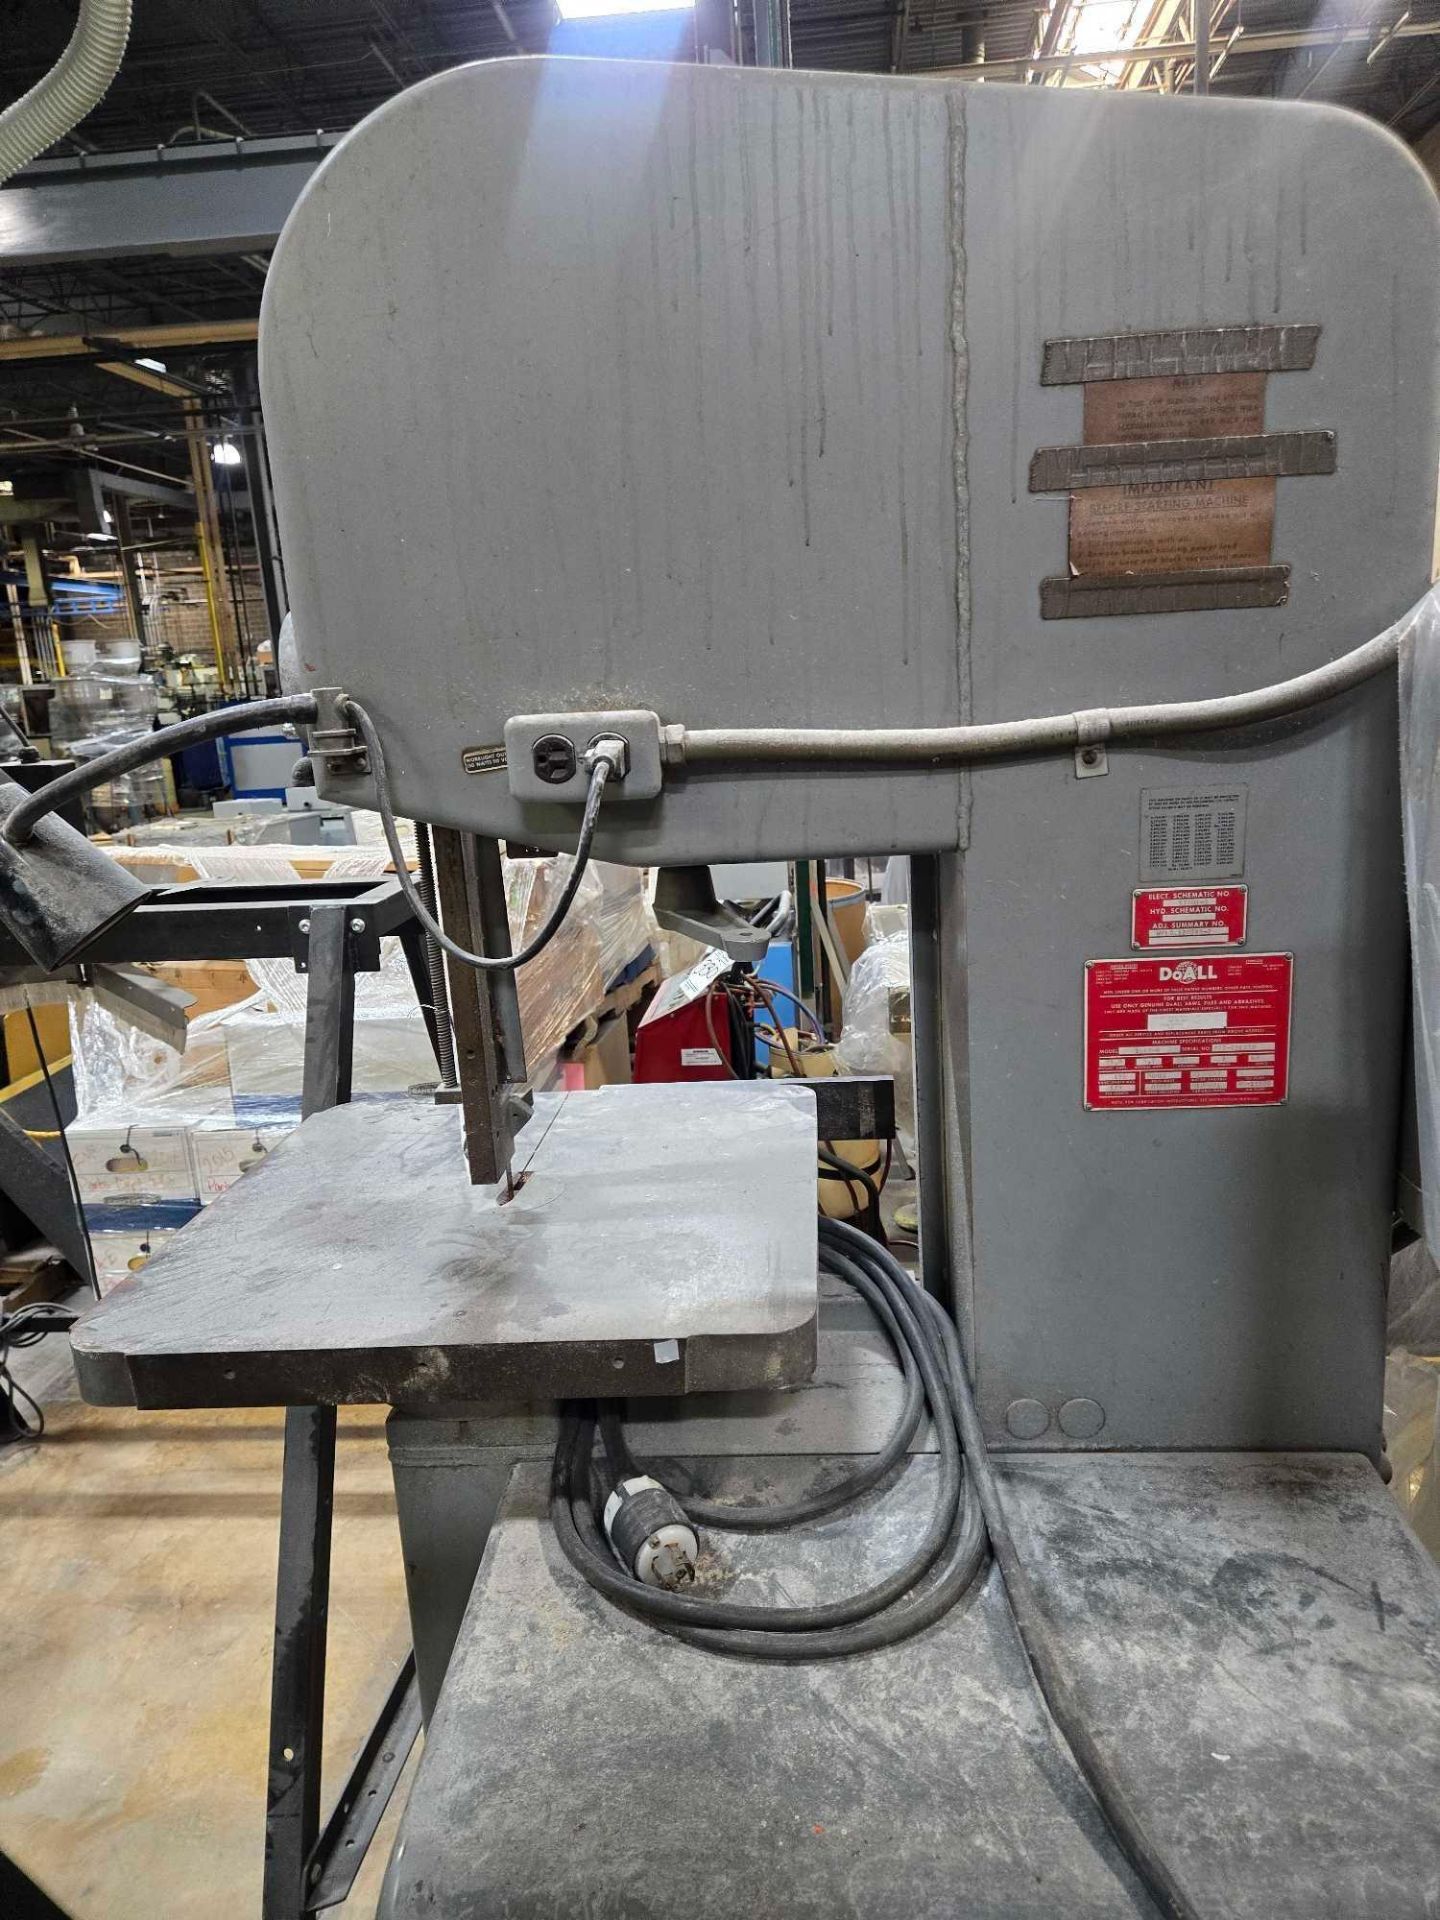 DOALL MODEL 1612-0 DBW-15 BAND SAW - Image 2 of 18